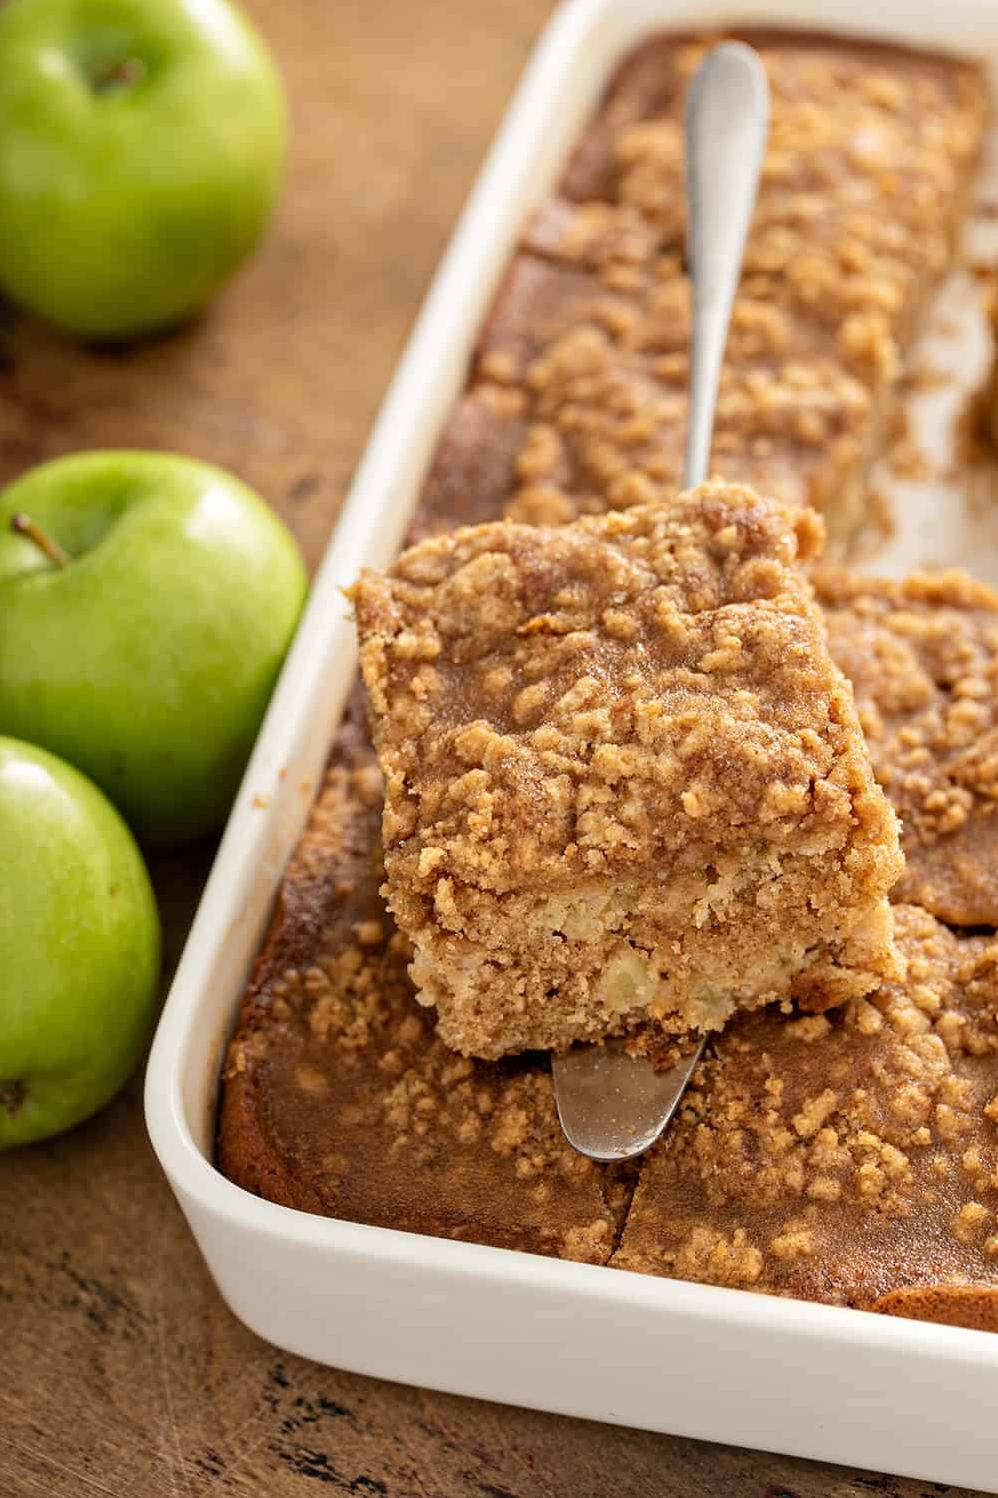  Indulge in the delicious aroma of fresh-baked apple coffee cake!